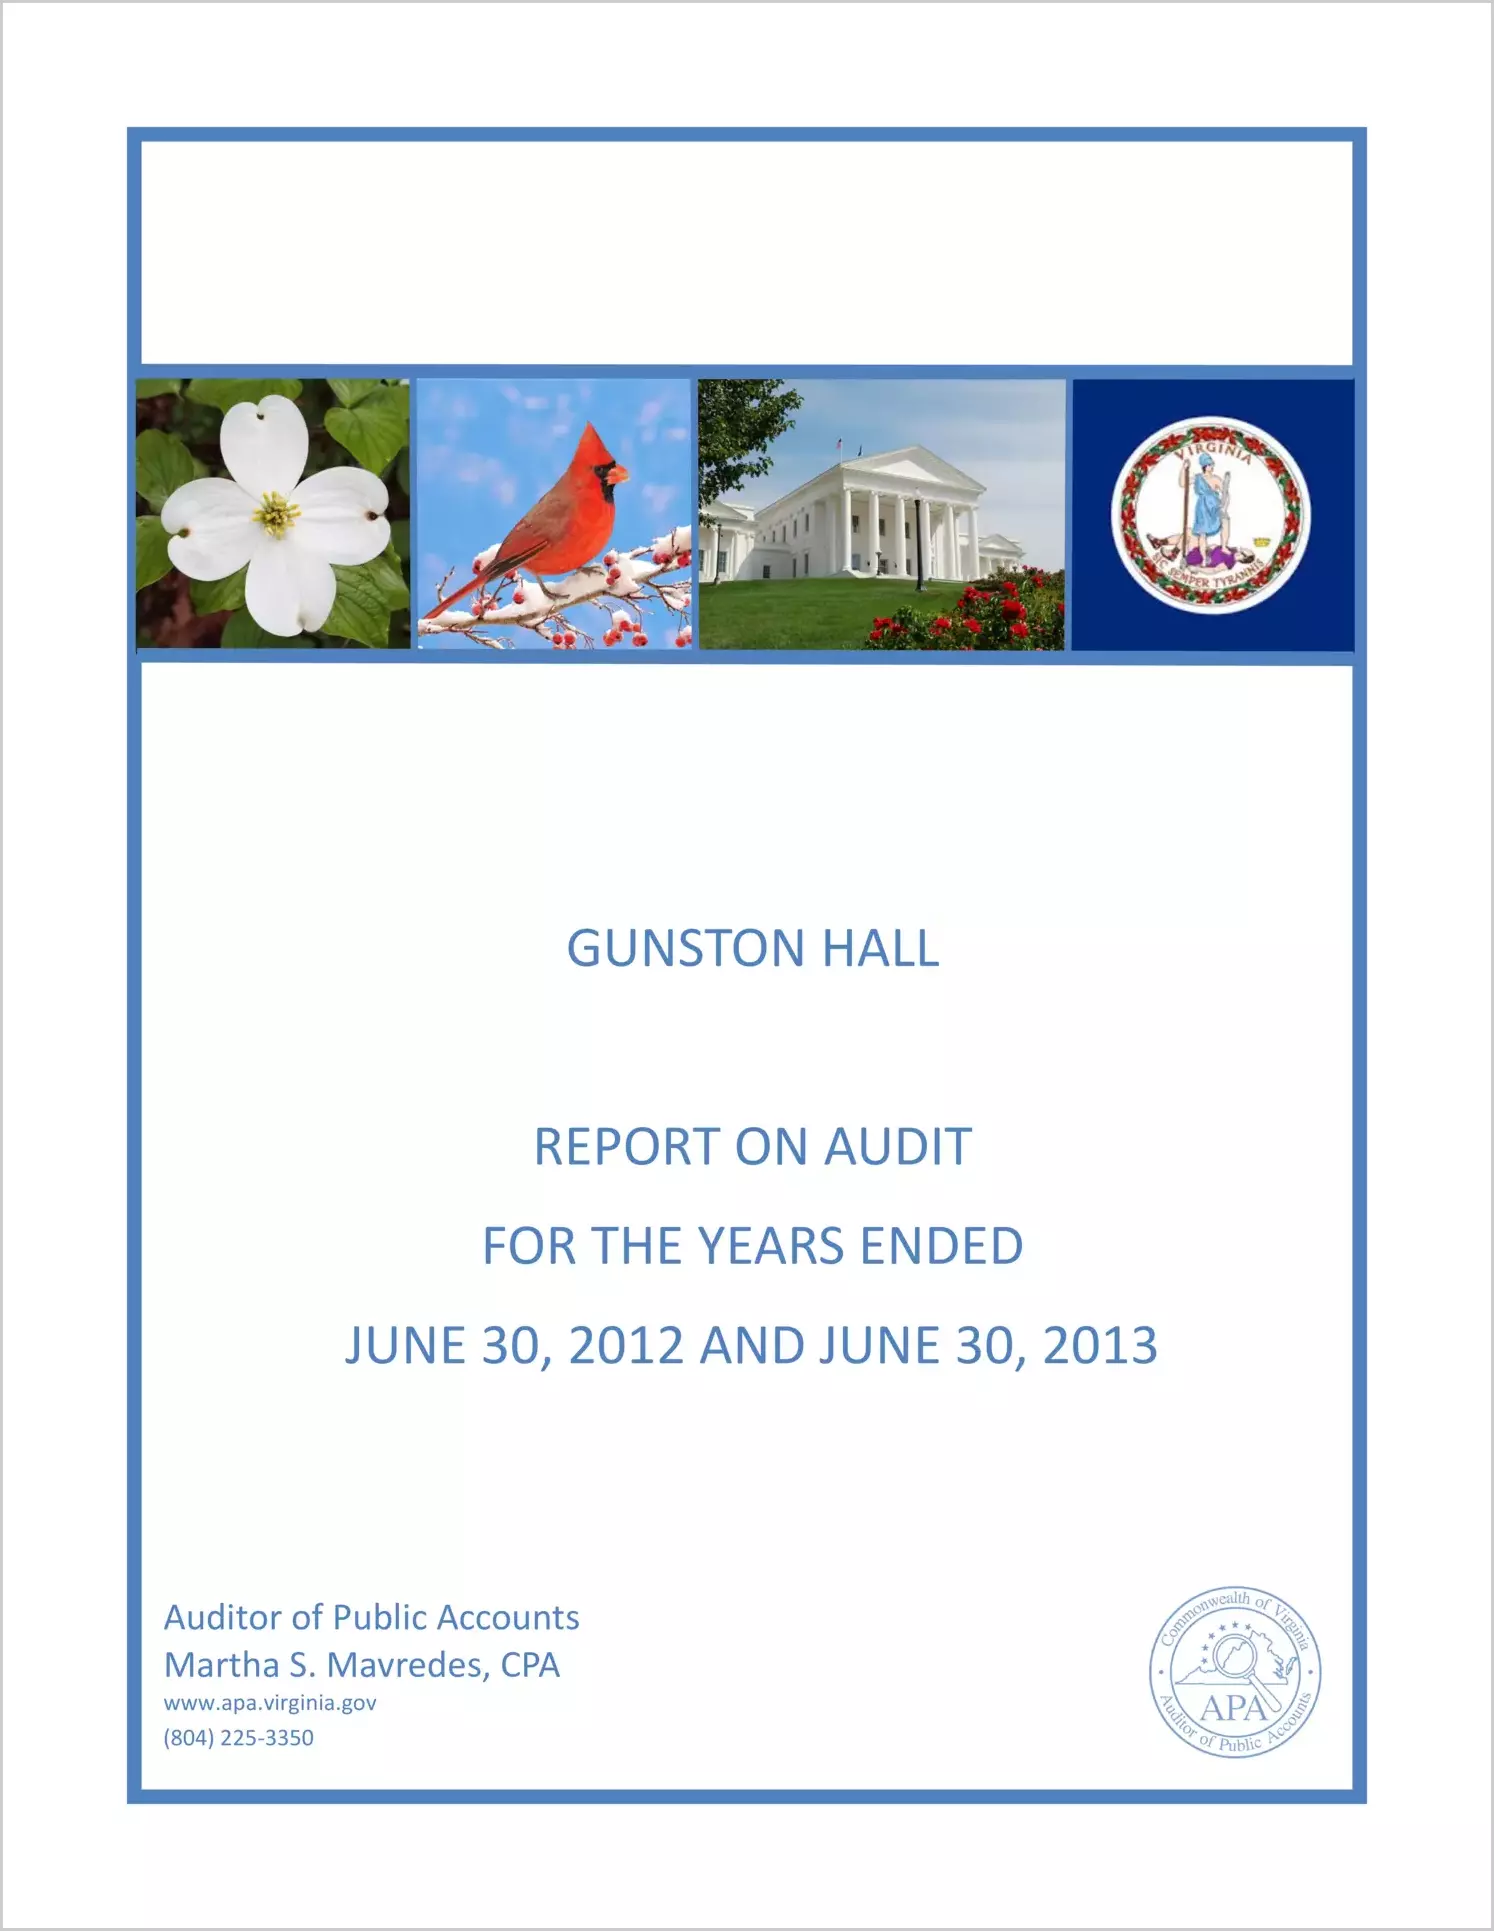 Gunston Hall for the years ended June 30, 2012 and June 30, 2013